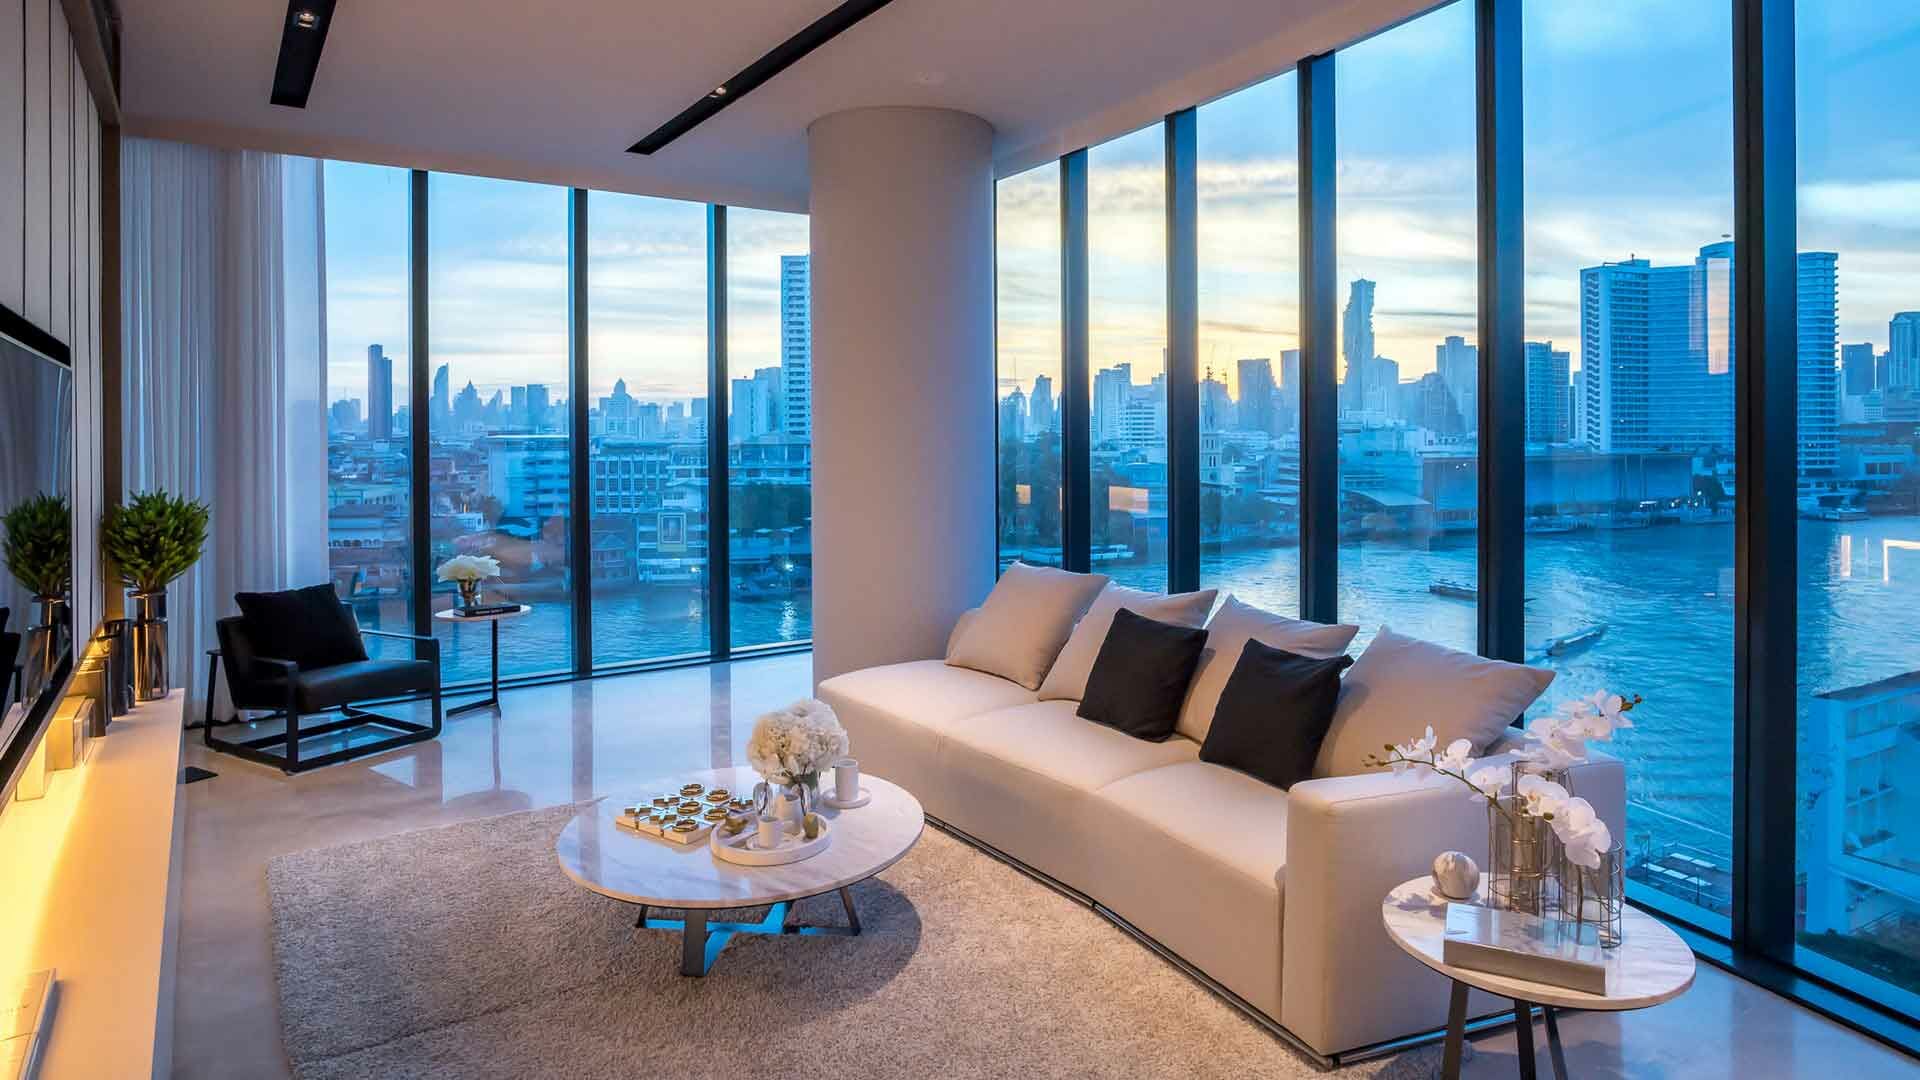 Step into opulence with a virtual tour of luxury condos in Bangkok